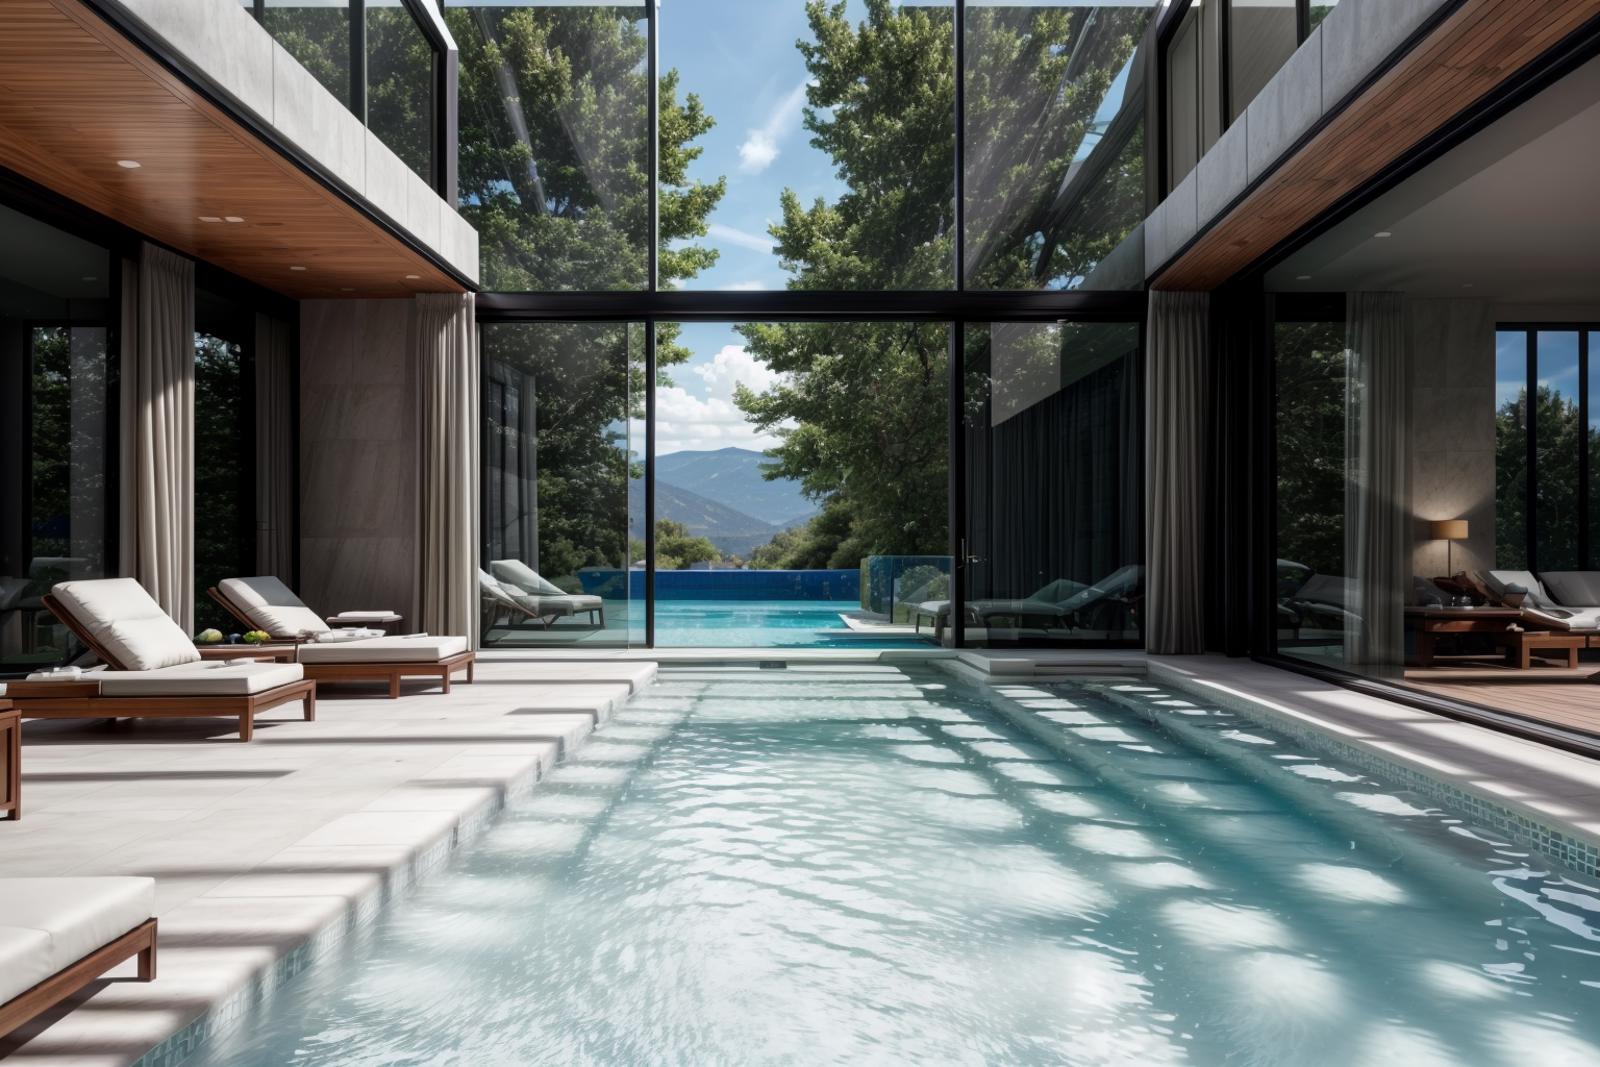 XSArchi_131酒店泳池Hotel pool image by XSarchitectural